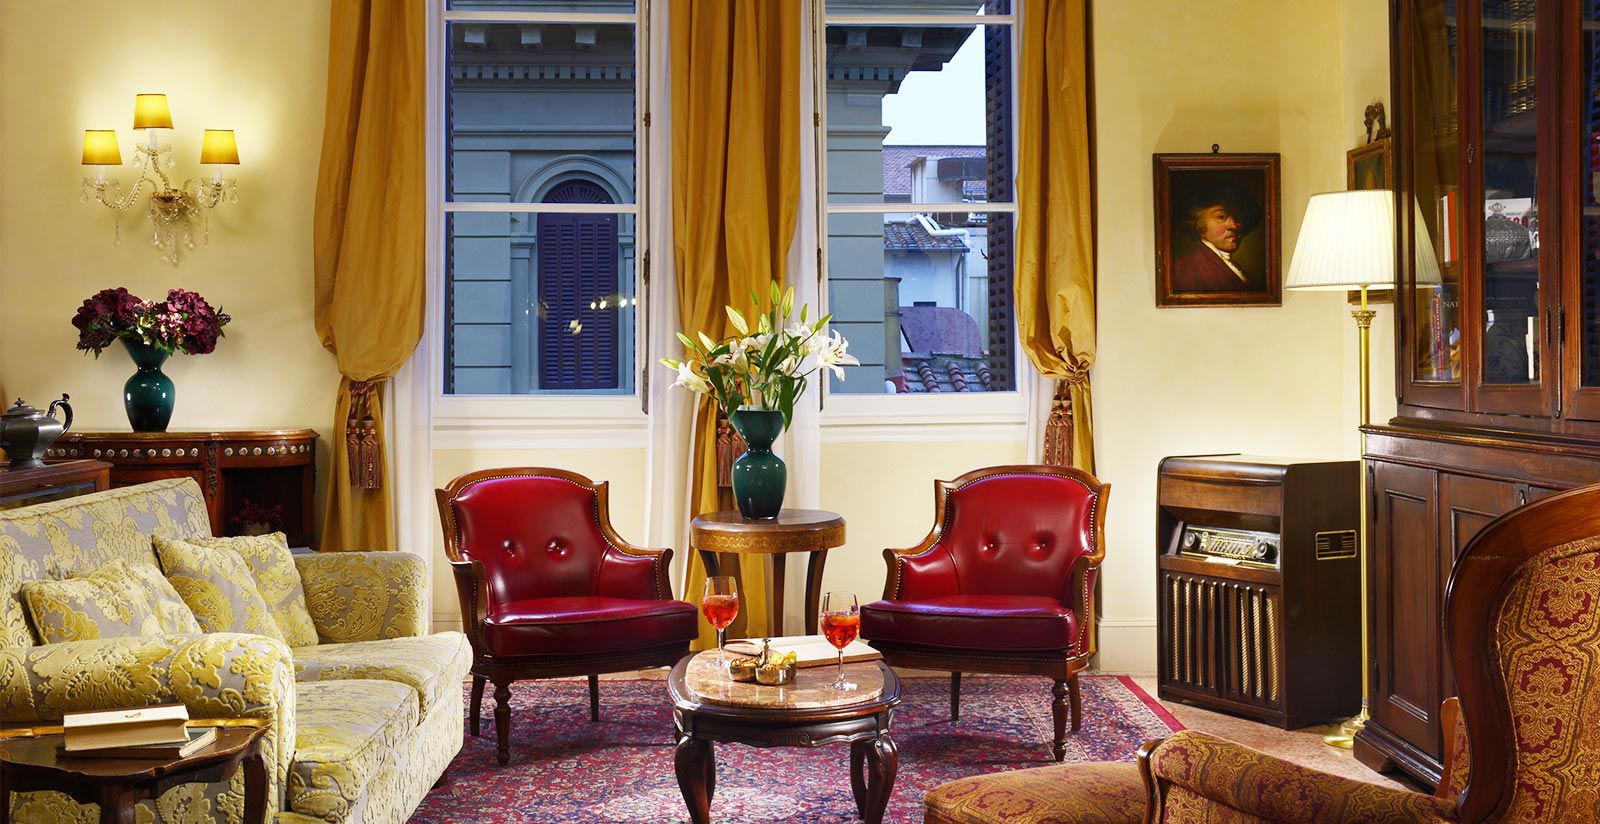 CHARMING HOLIDAY AT PENDINI'S, IN THE HEART OF FLORENCE 4